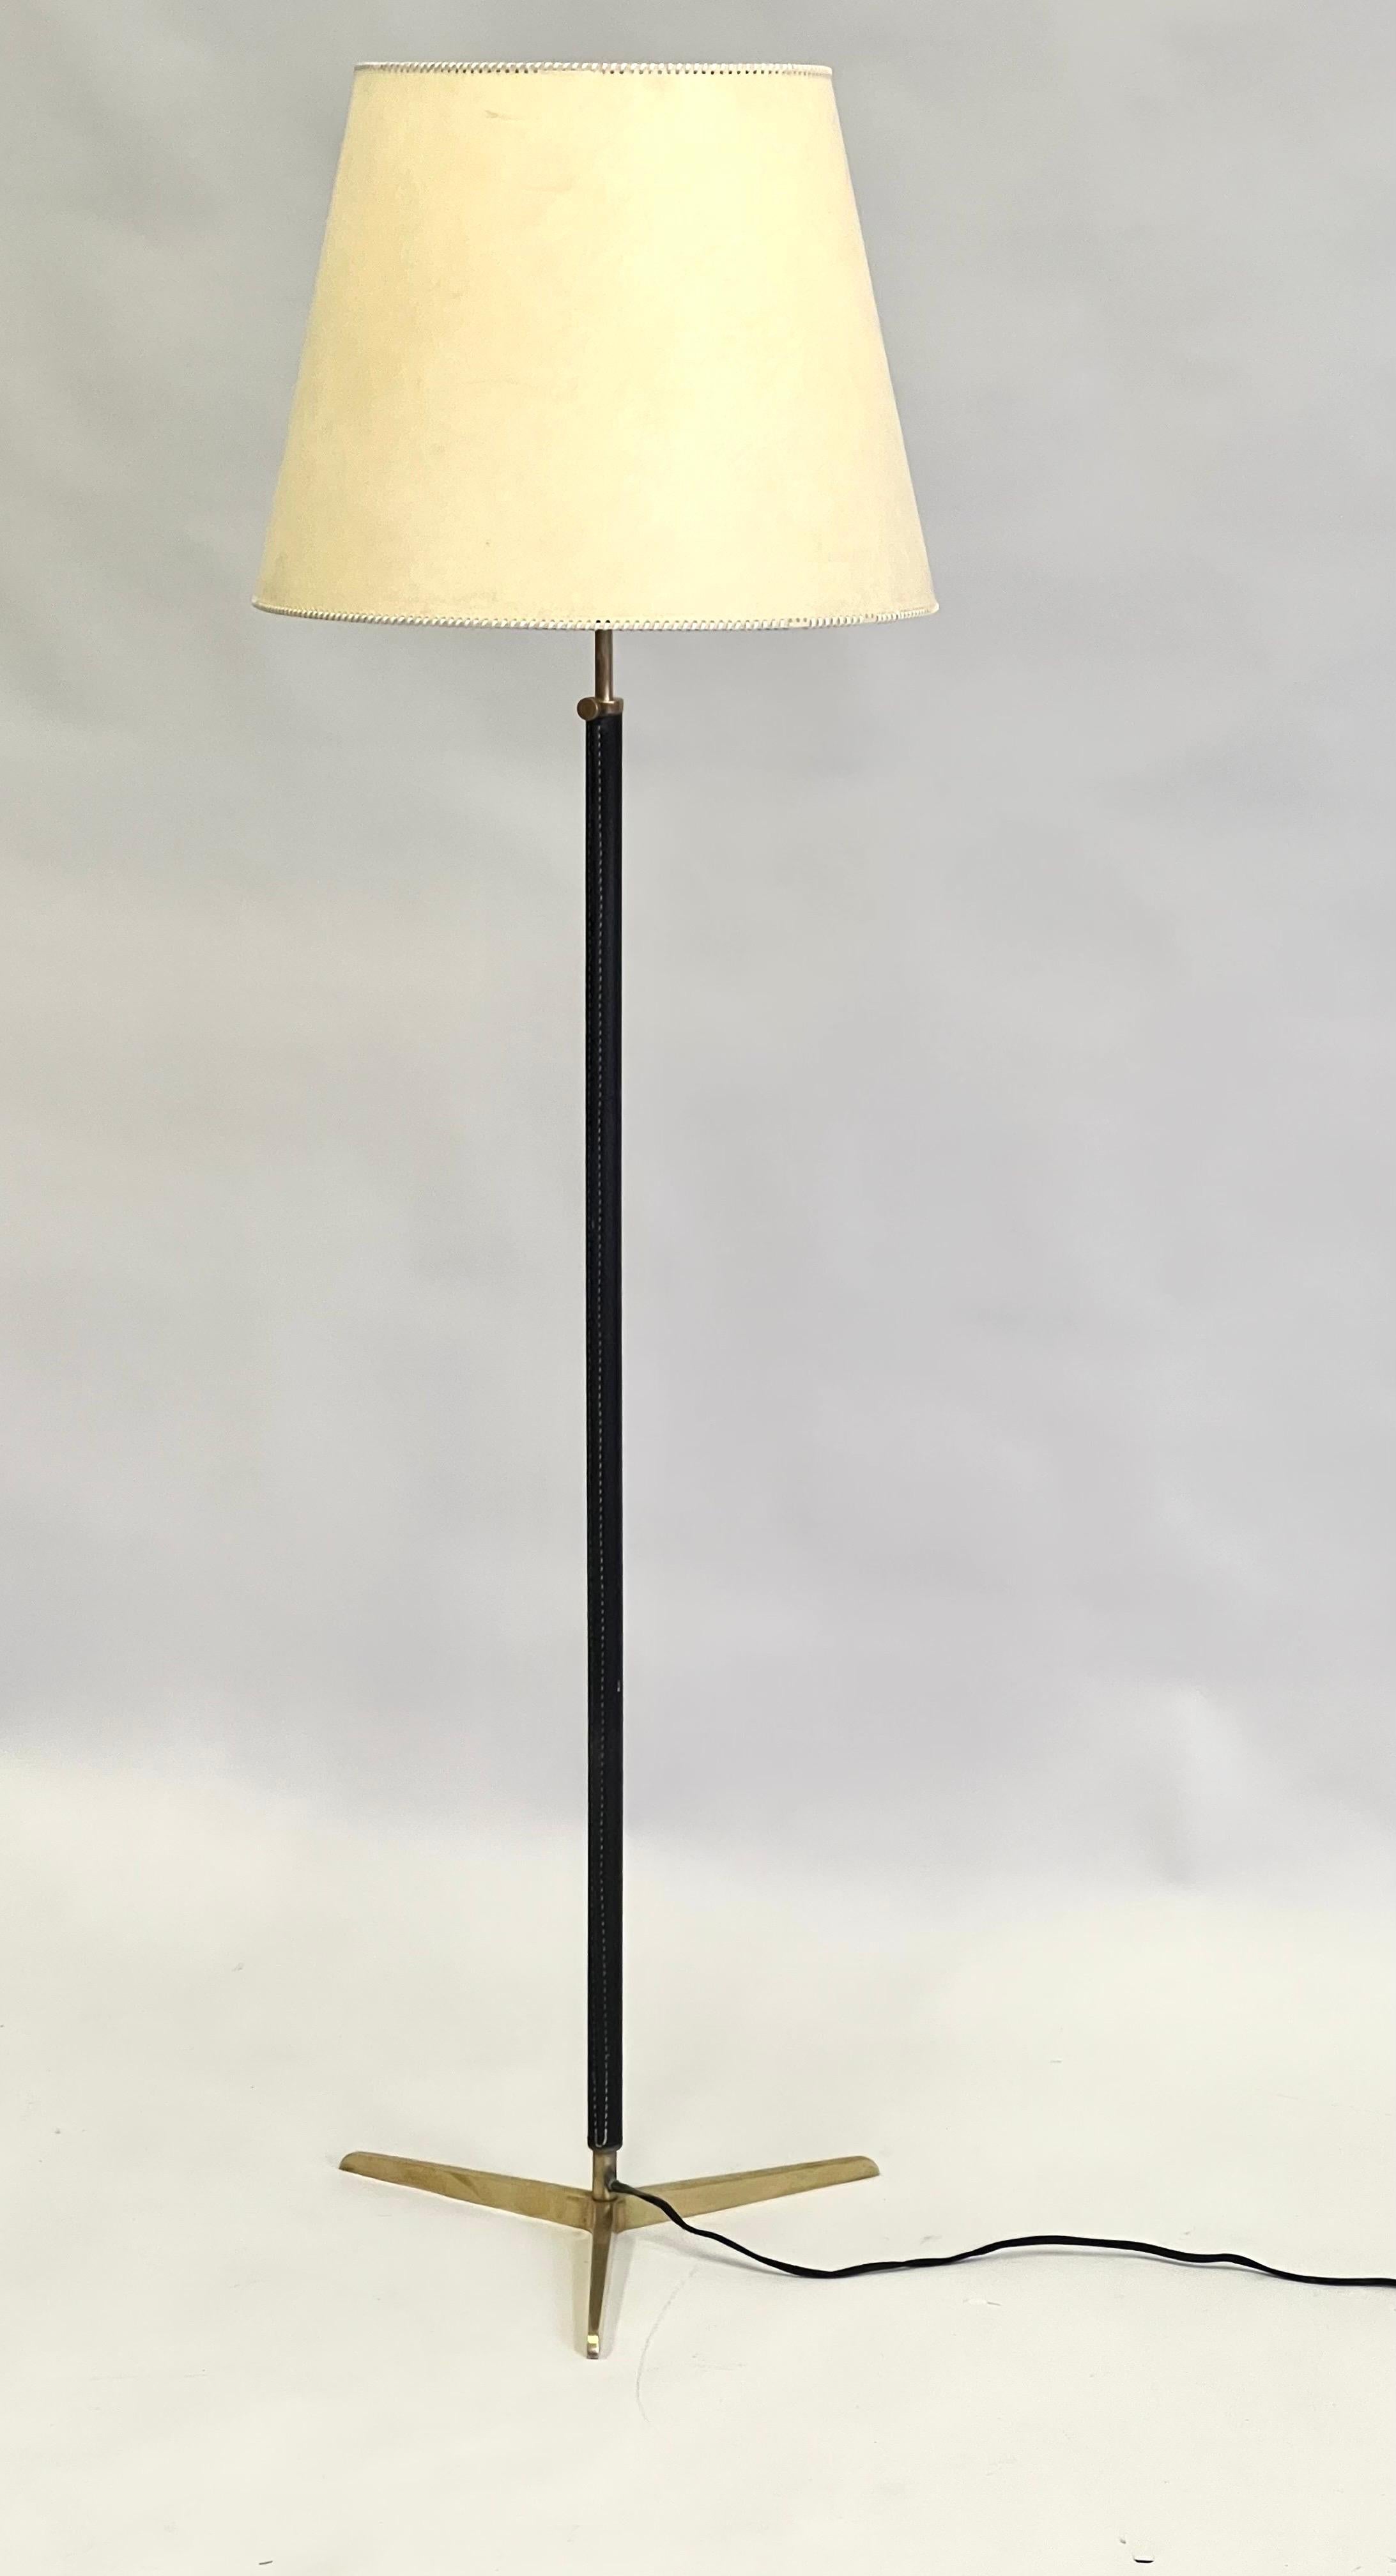 Elegant, modern and timeless french Mid-Century Modern hand-stitched leather and brass floor lamp attributed to Jacques Adnet. The lamp has a exquisite, pure form with its solid brass tripod base that is delicately tapered. The hand stitched black